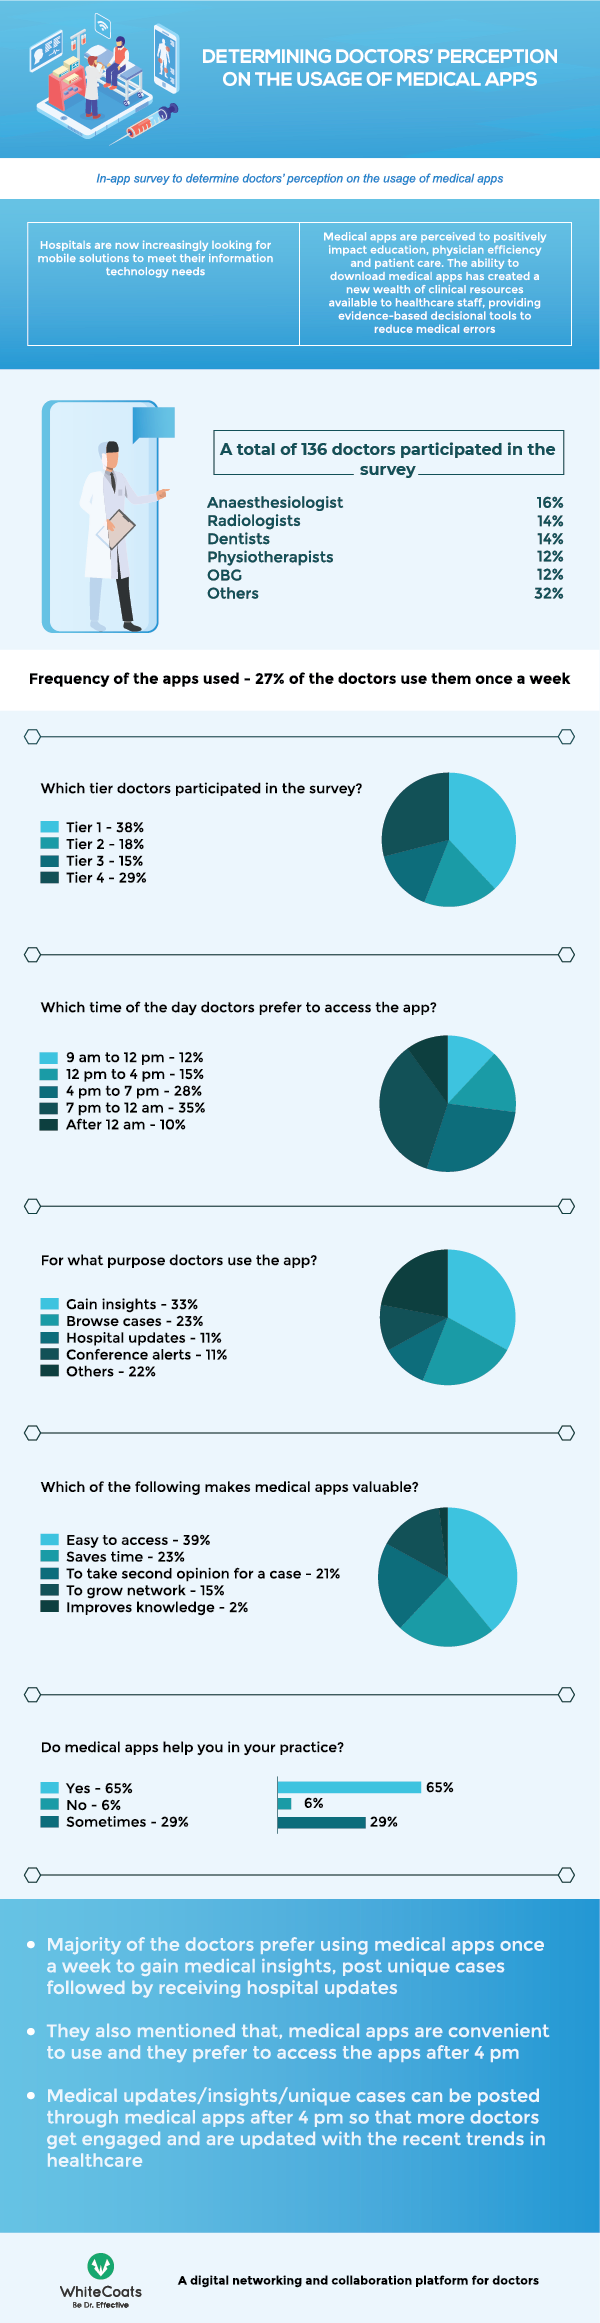 INSIGHTS Doctors Perception On The Usage Of Medical Apps For Their Practice